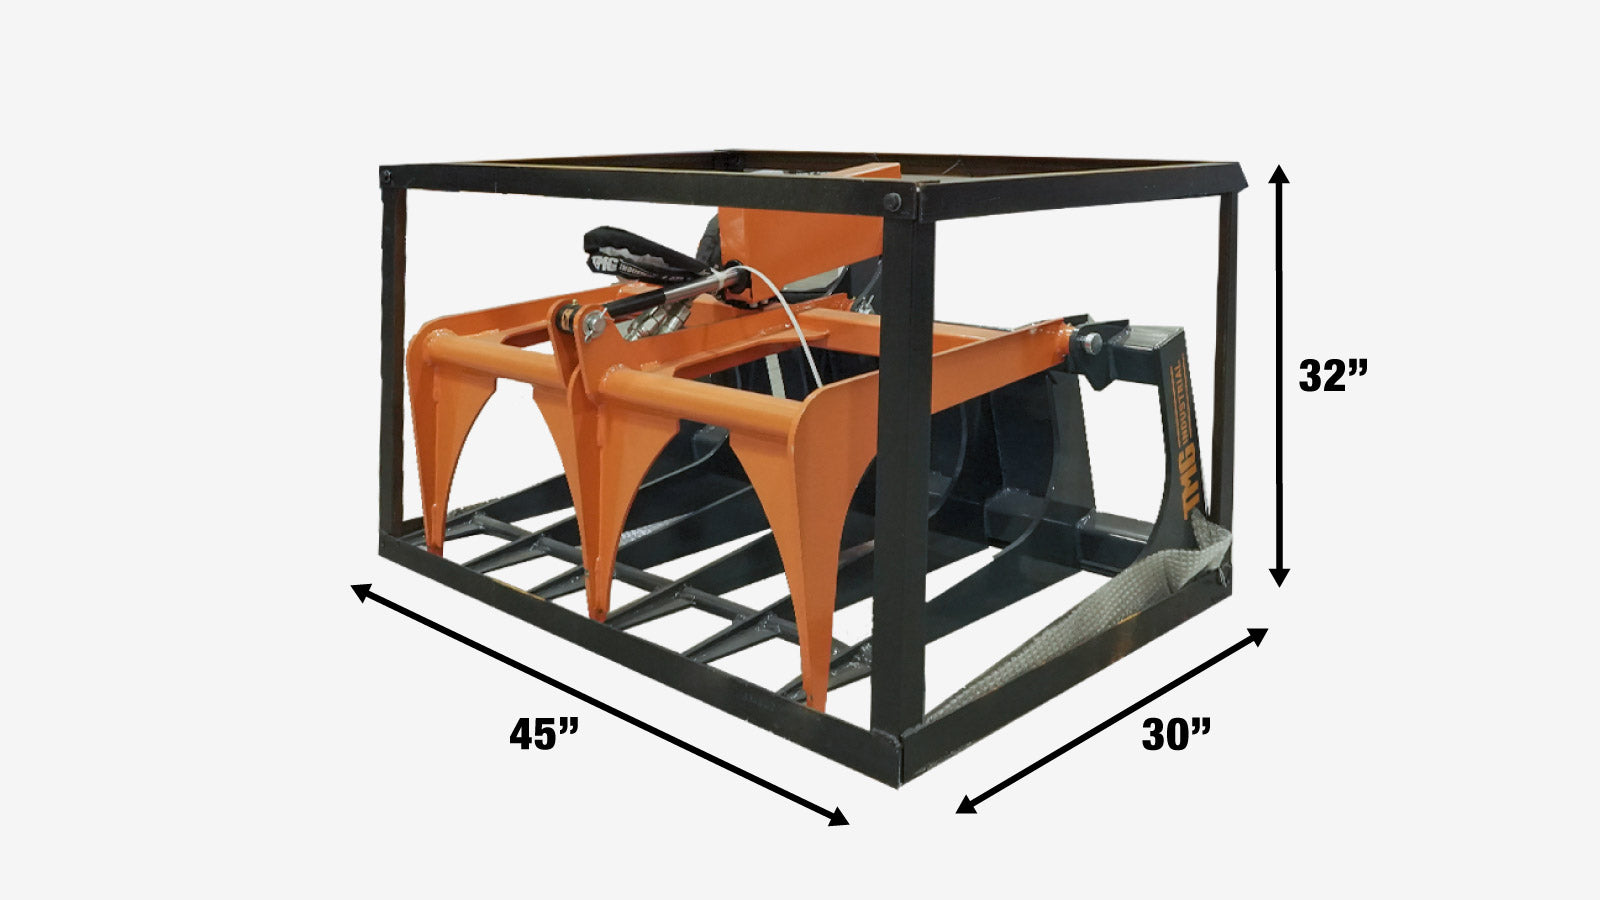 TMG Industrial 42” Mini Skid Steer Skeleton Grapple Attachment, Toro Style Mount, 24” Arm Opening, 2000 lb Weight Capacity, TMG-SG42-shipping-info-image